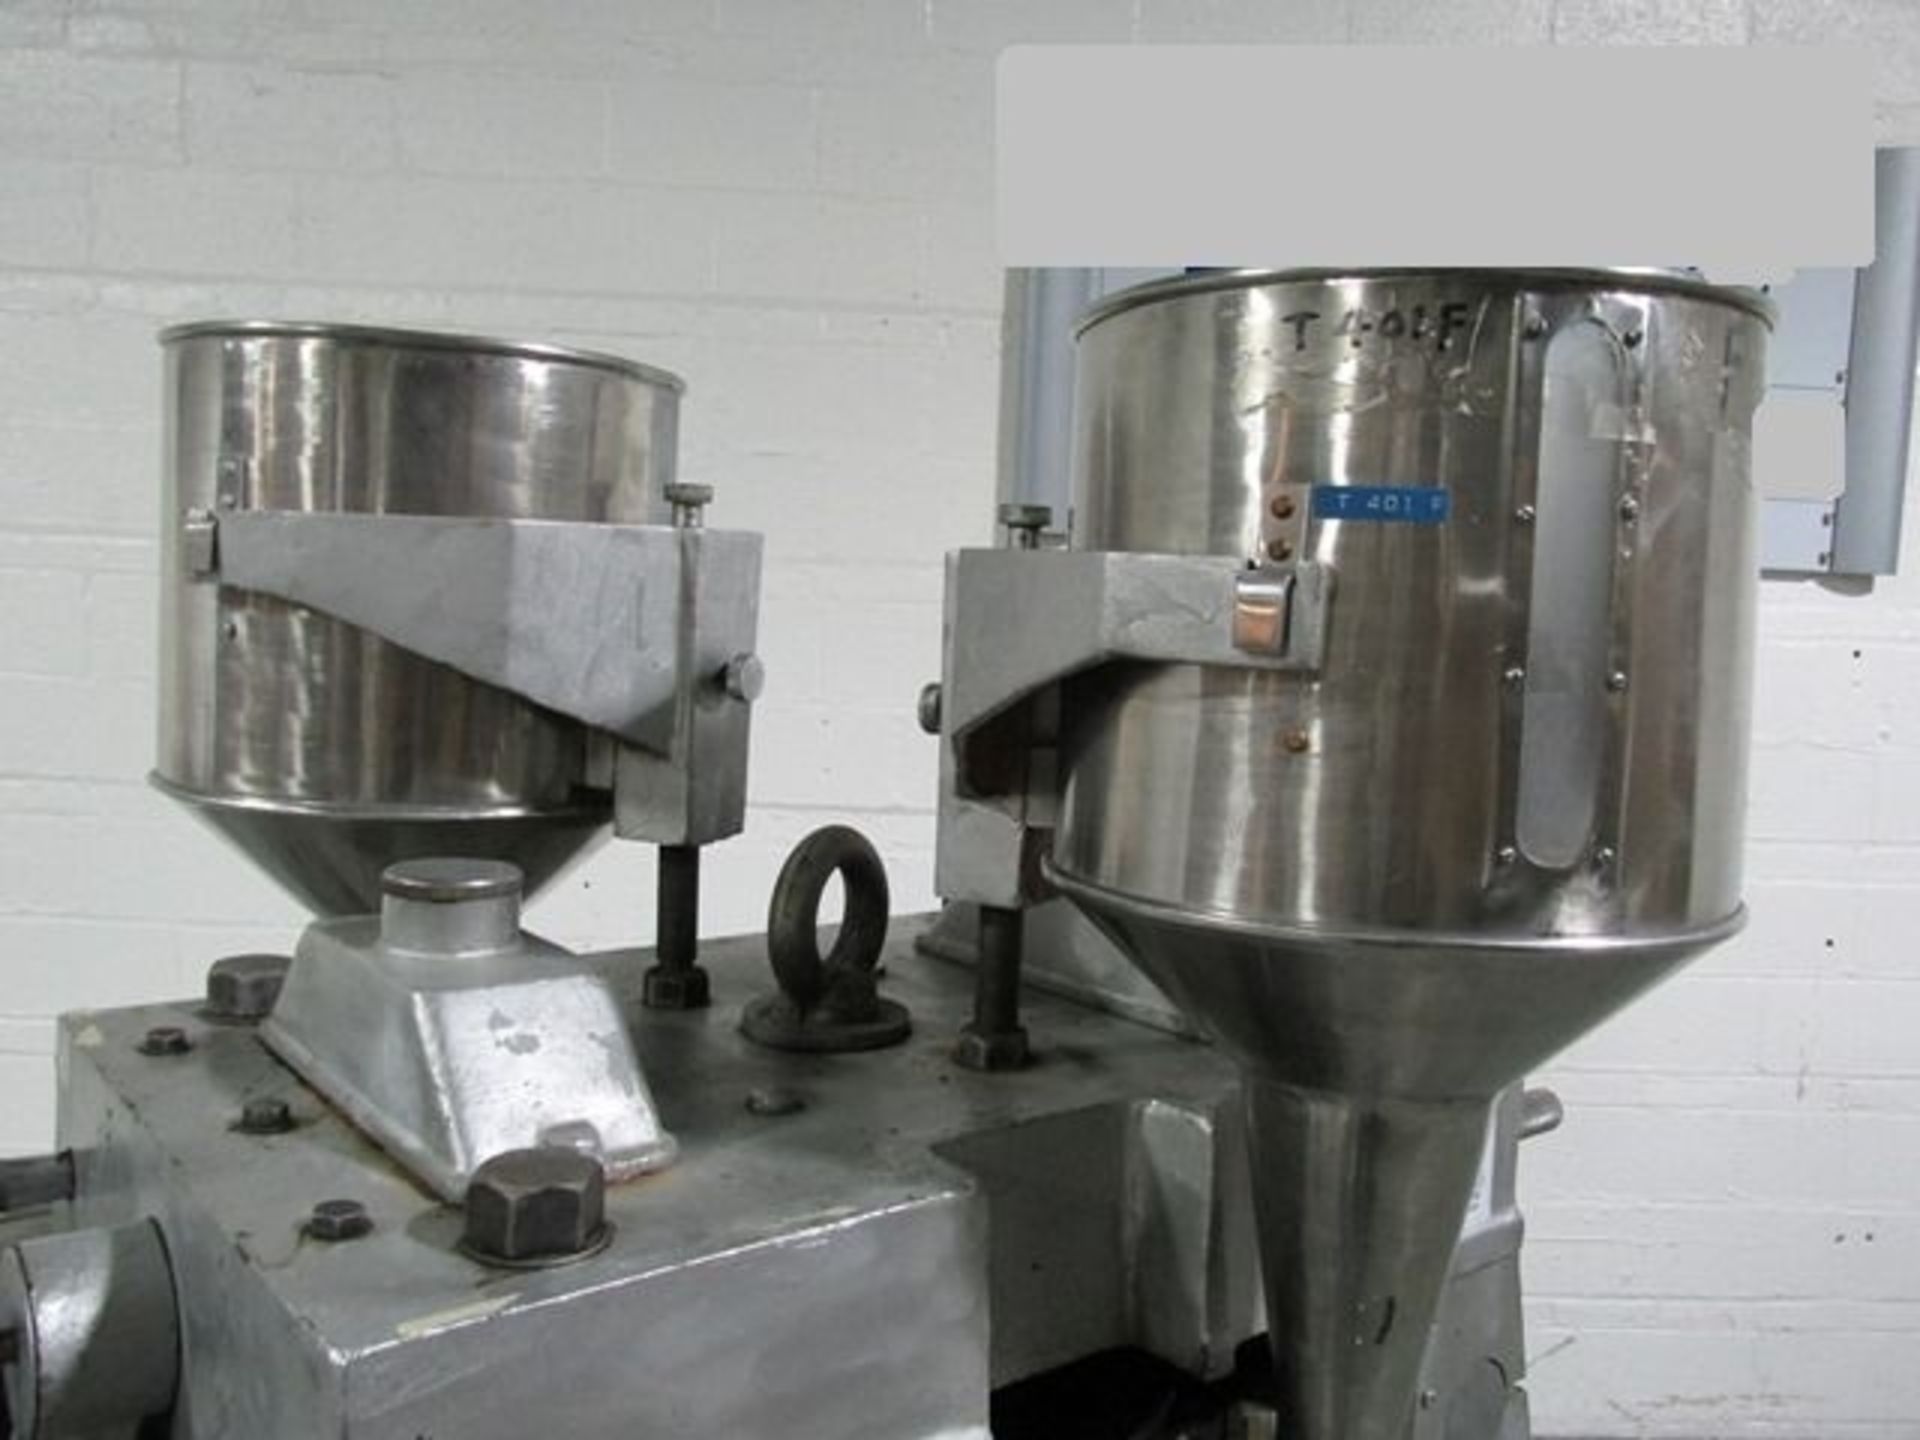 ZP rotary tablet press, model ZP37, 37 station, 60 KN compression pressure, double sided, 12 mm max - Image 4 of 10